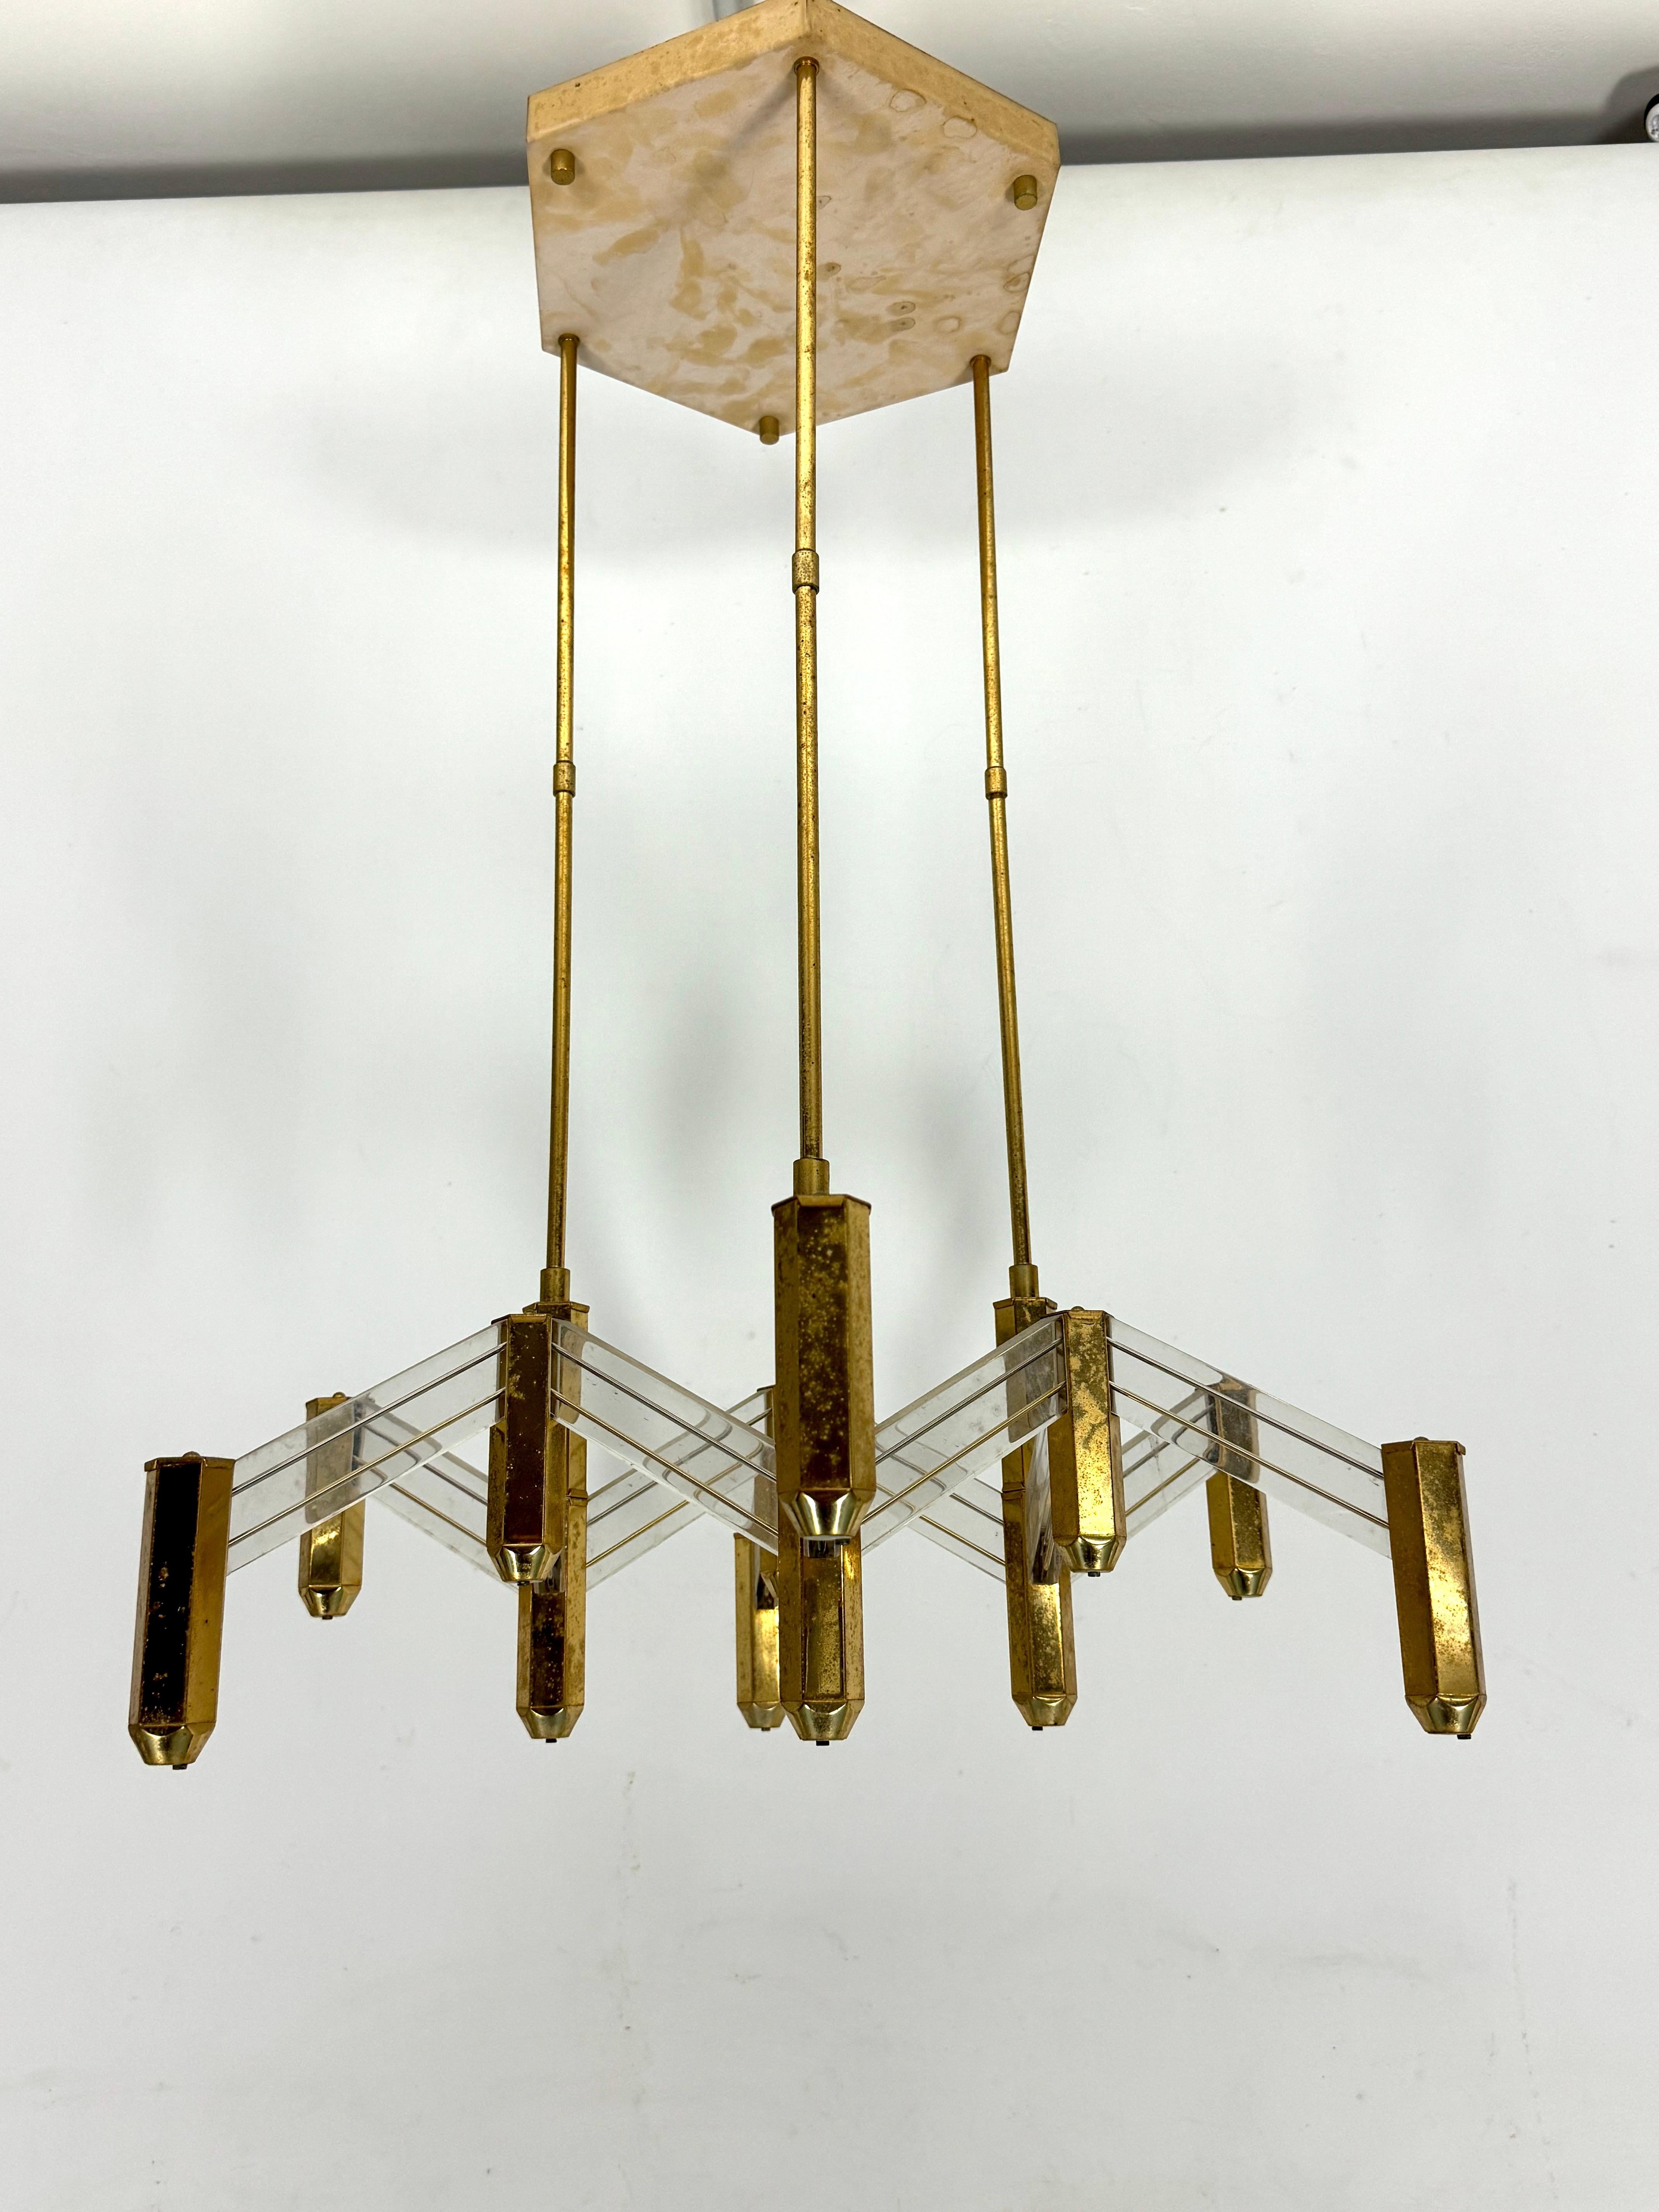 Good vintage condition for this chandelier made from brass and perspex and produced in Italy during the 70s from Zeroquattro. It mounts 12 sockets for halogen lamps model G4. Full working with EU standard, adaptable on demand for USA standard.
